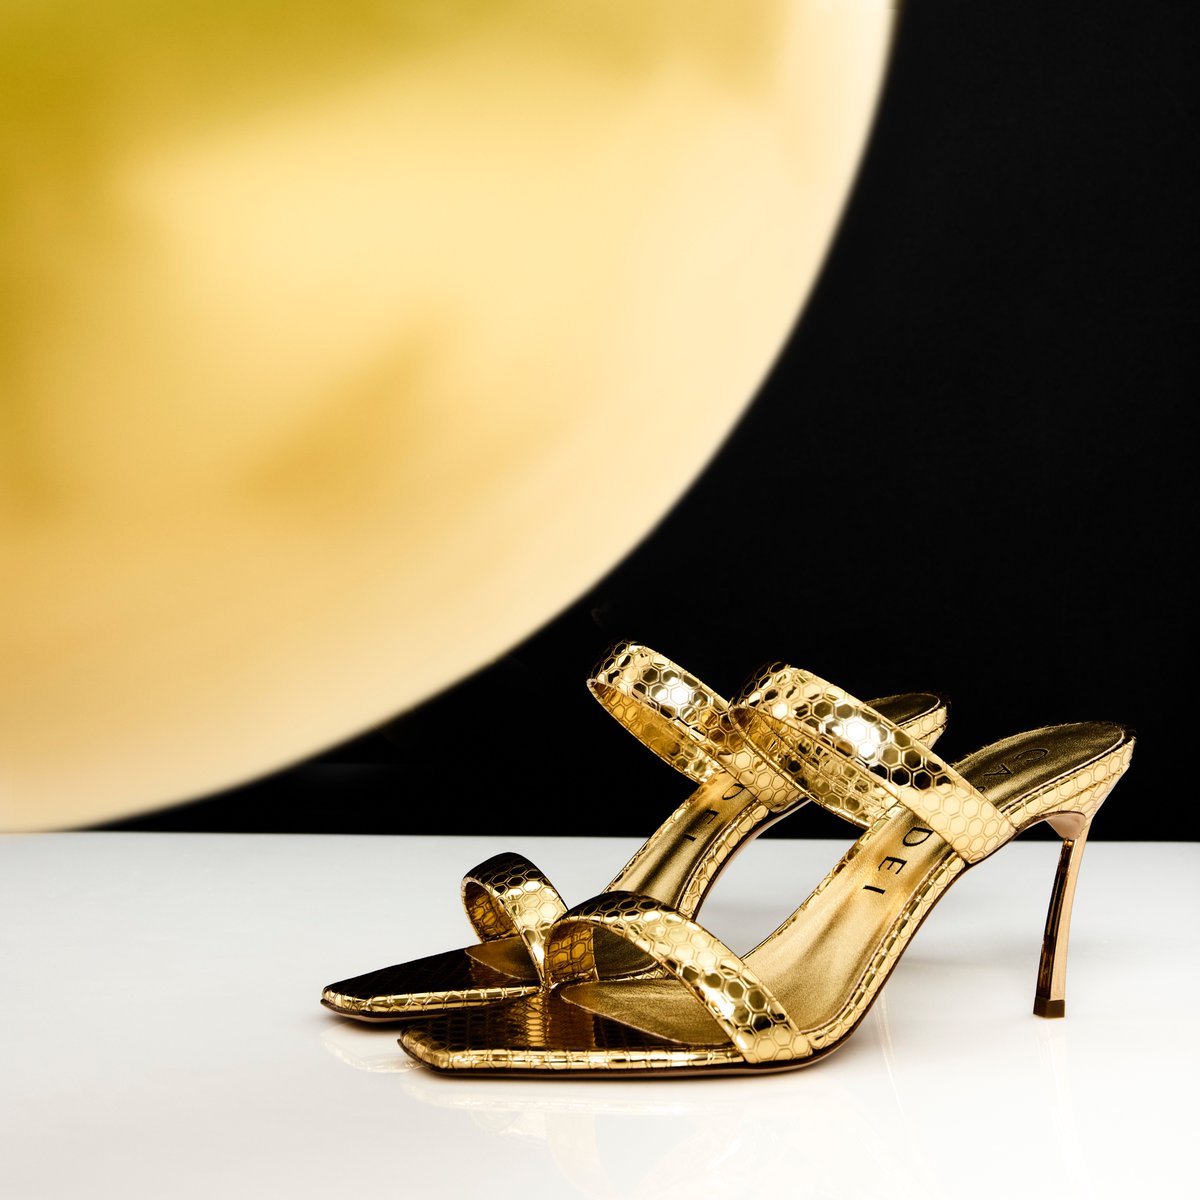 It’s time to shine with our new Atomium Superblade mule. #CasadeiWorld casadei.com/en/new-arrival…